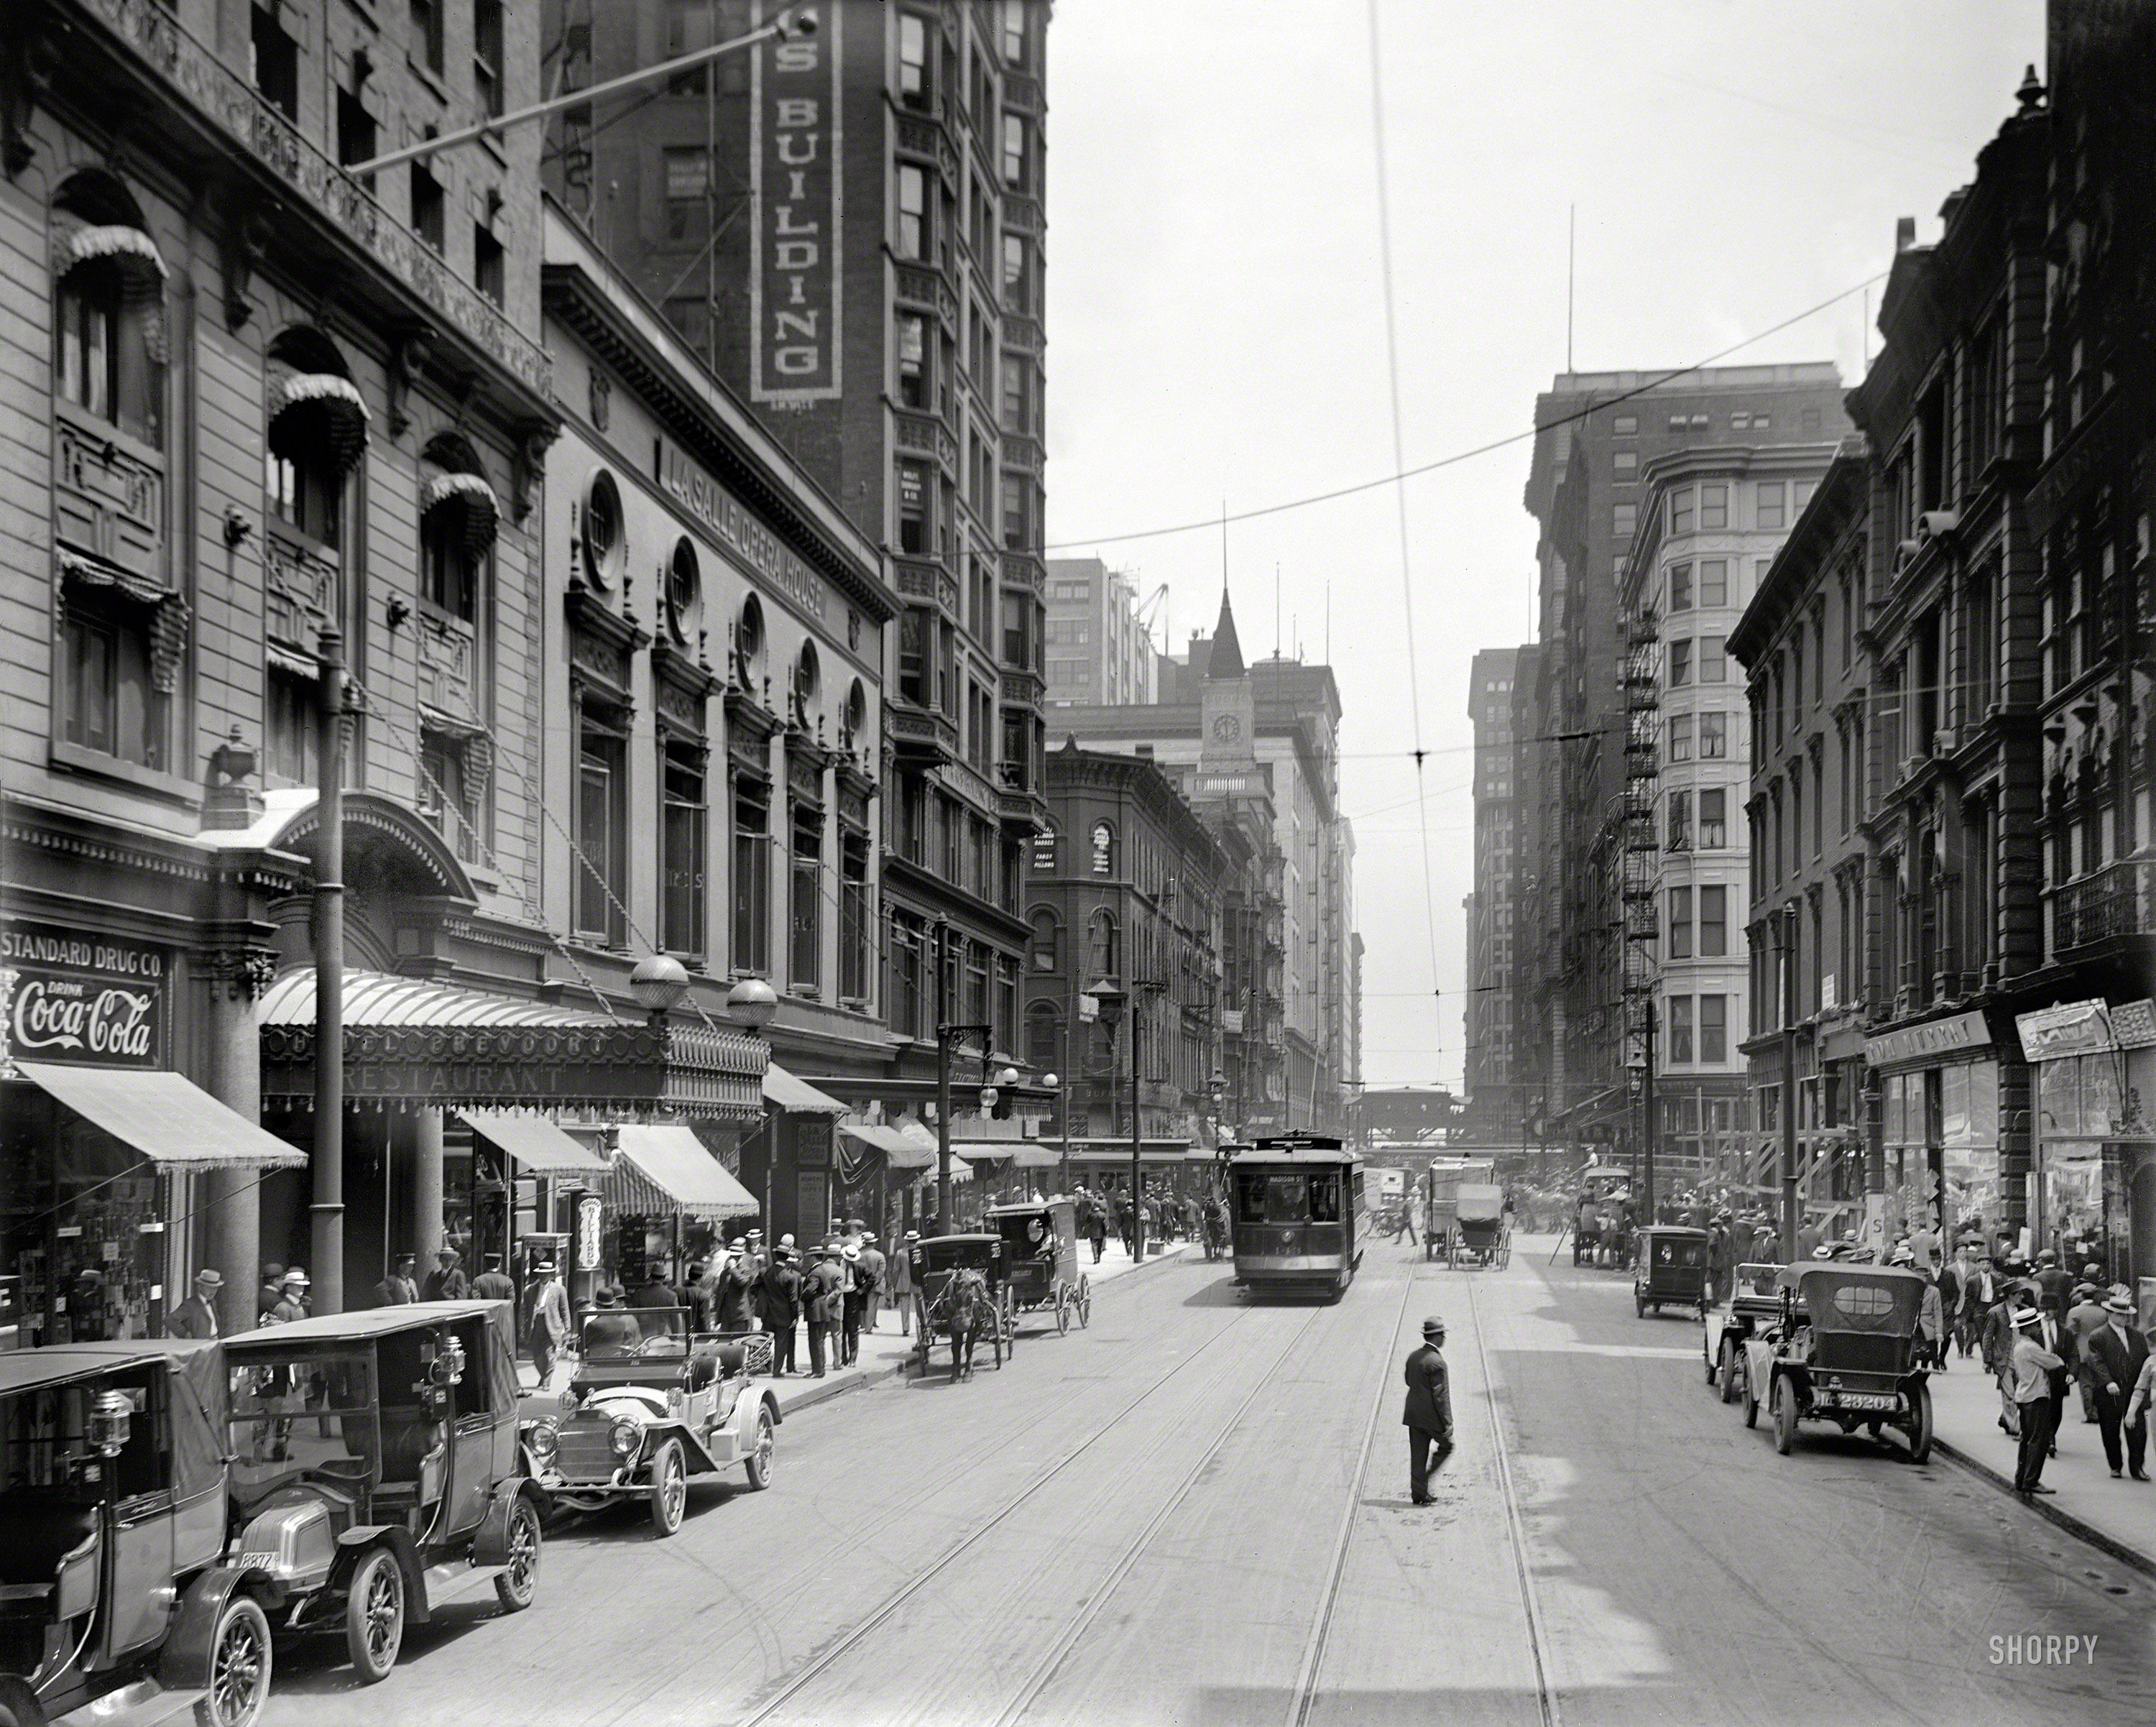 Chicago circa 1910. "Madison Street, Hotel Brevoort & La Salle Opera House." The fad for automobiles seems to be growing. 8x10 inch glass negative. View full size.